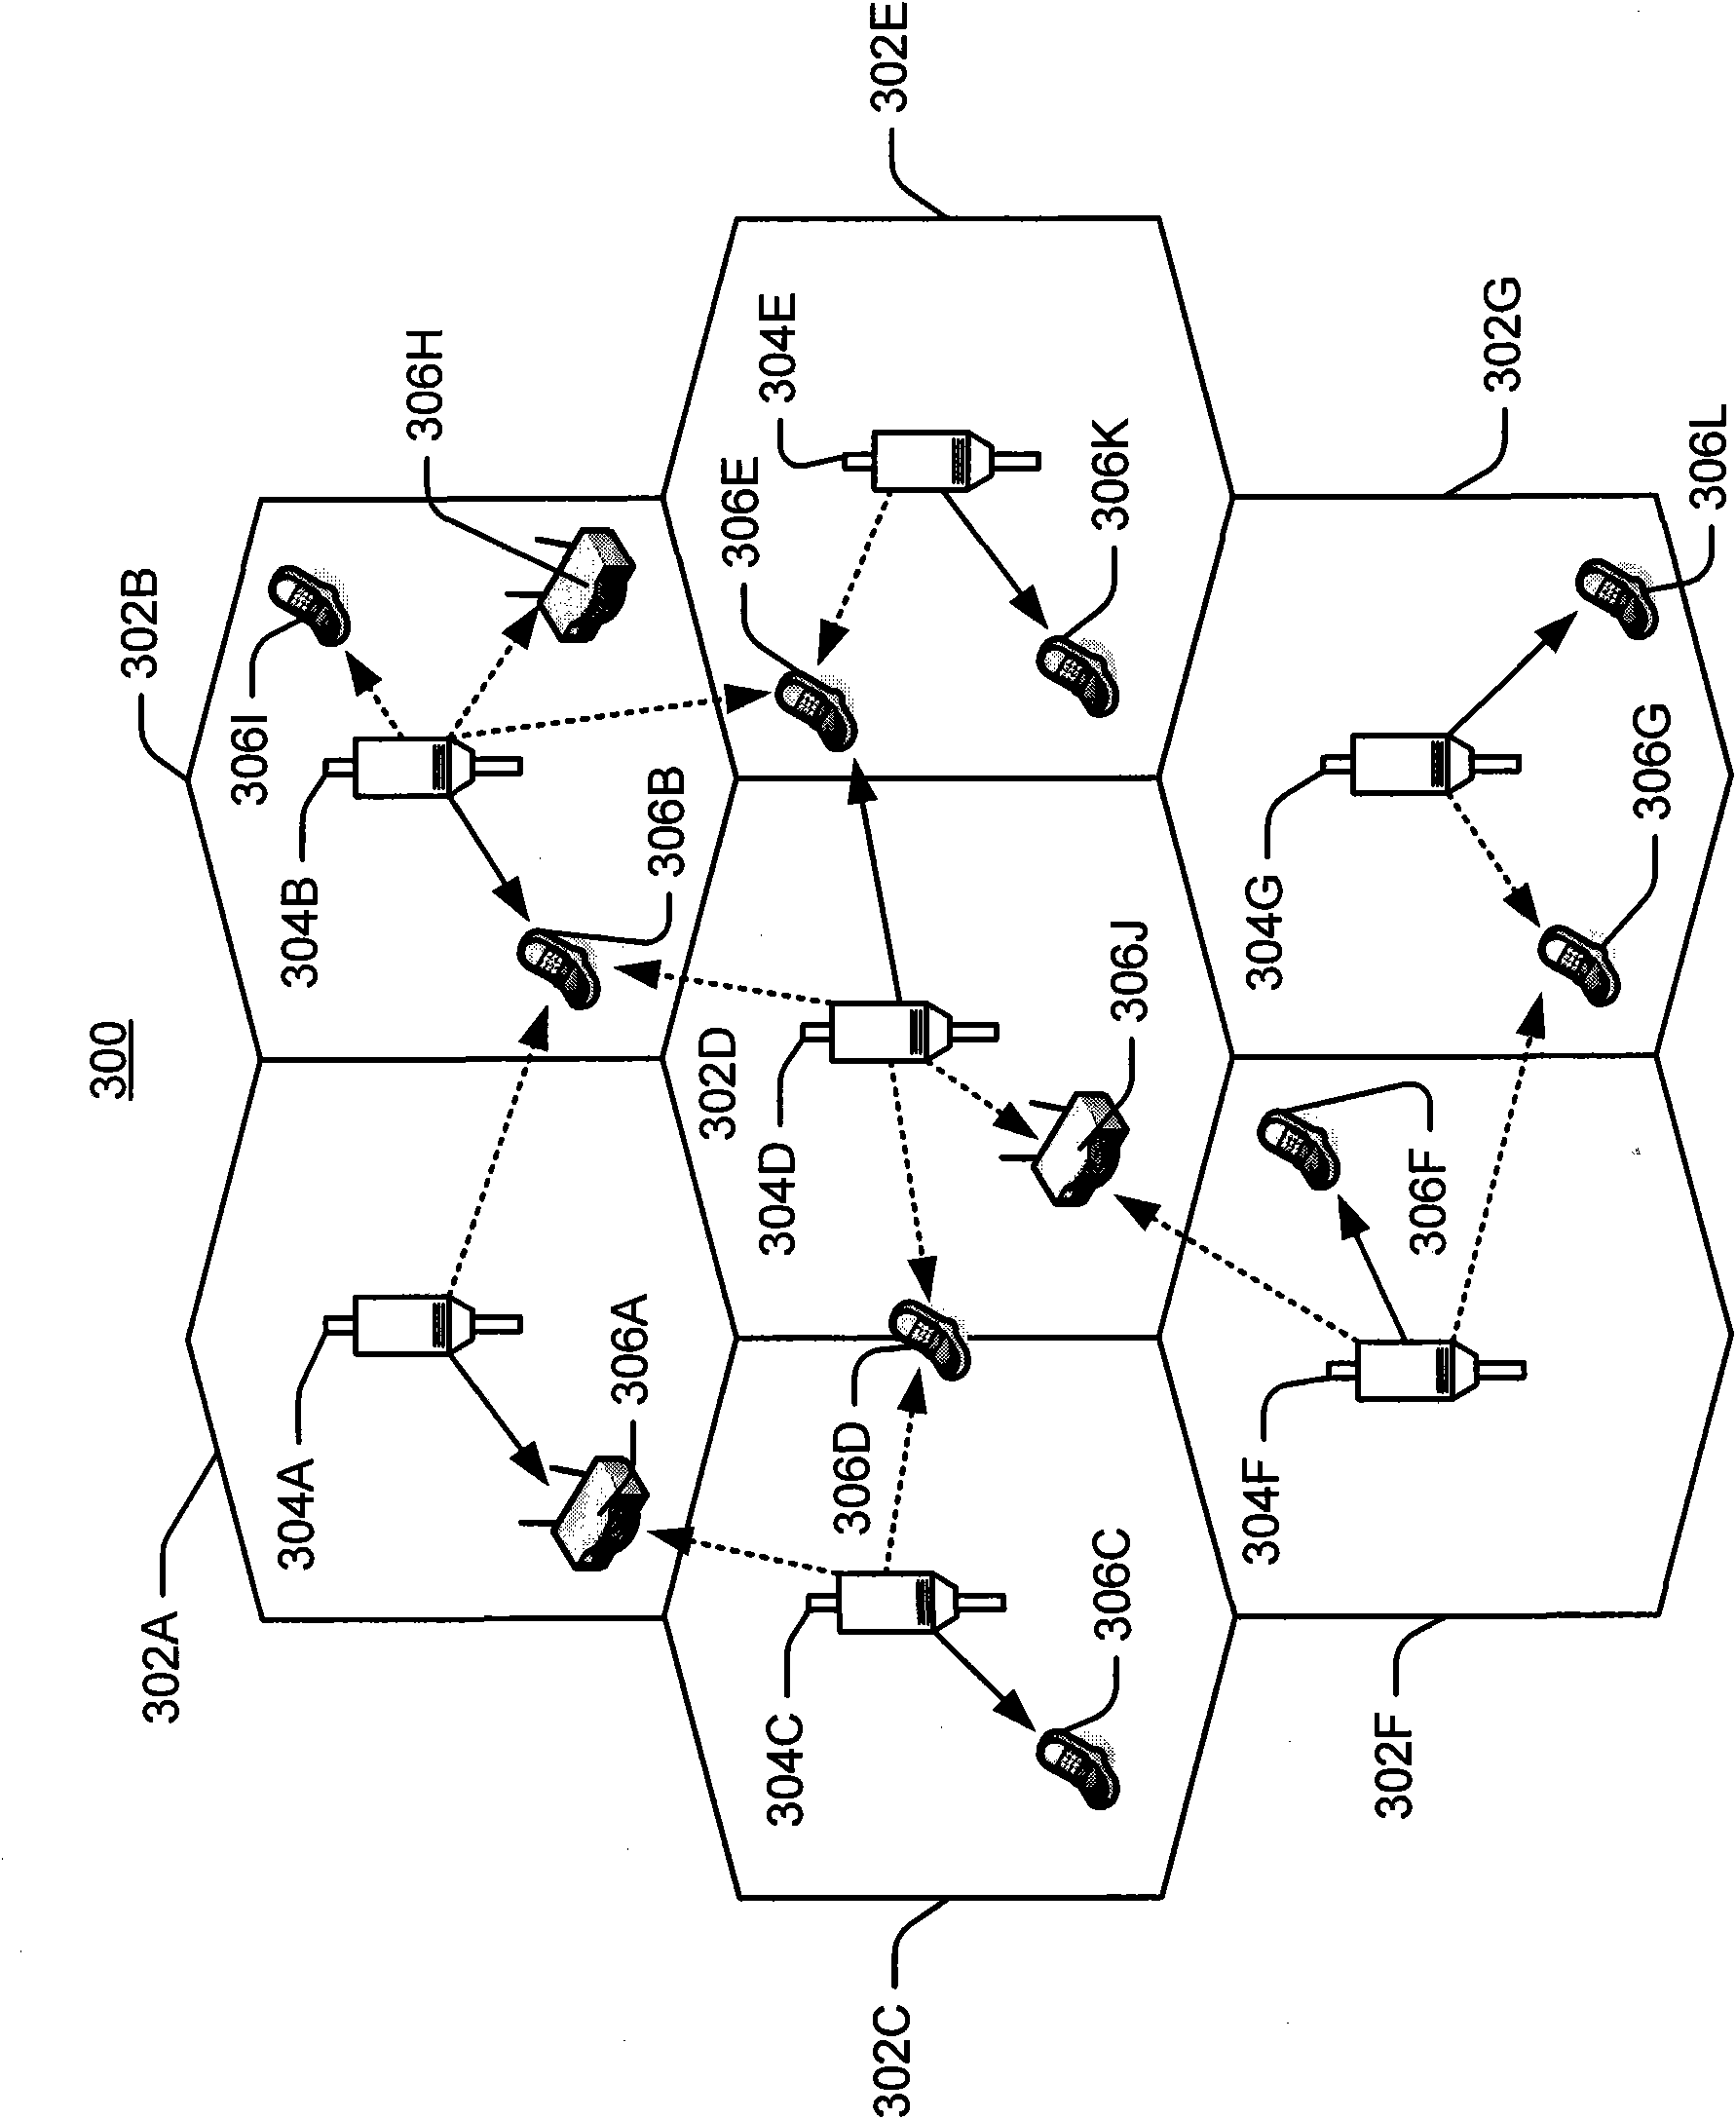 Method and apparatus for defining a search window based on distance between access points